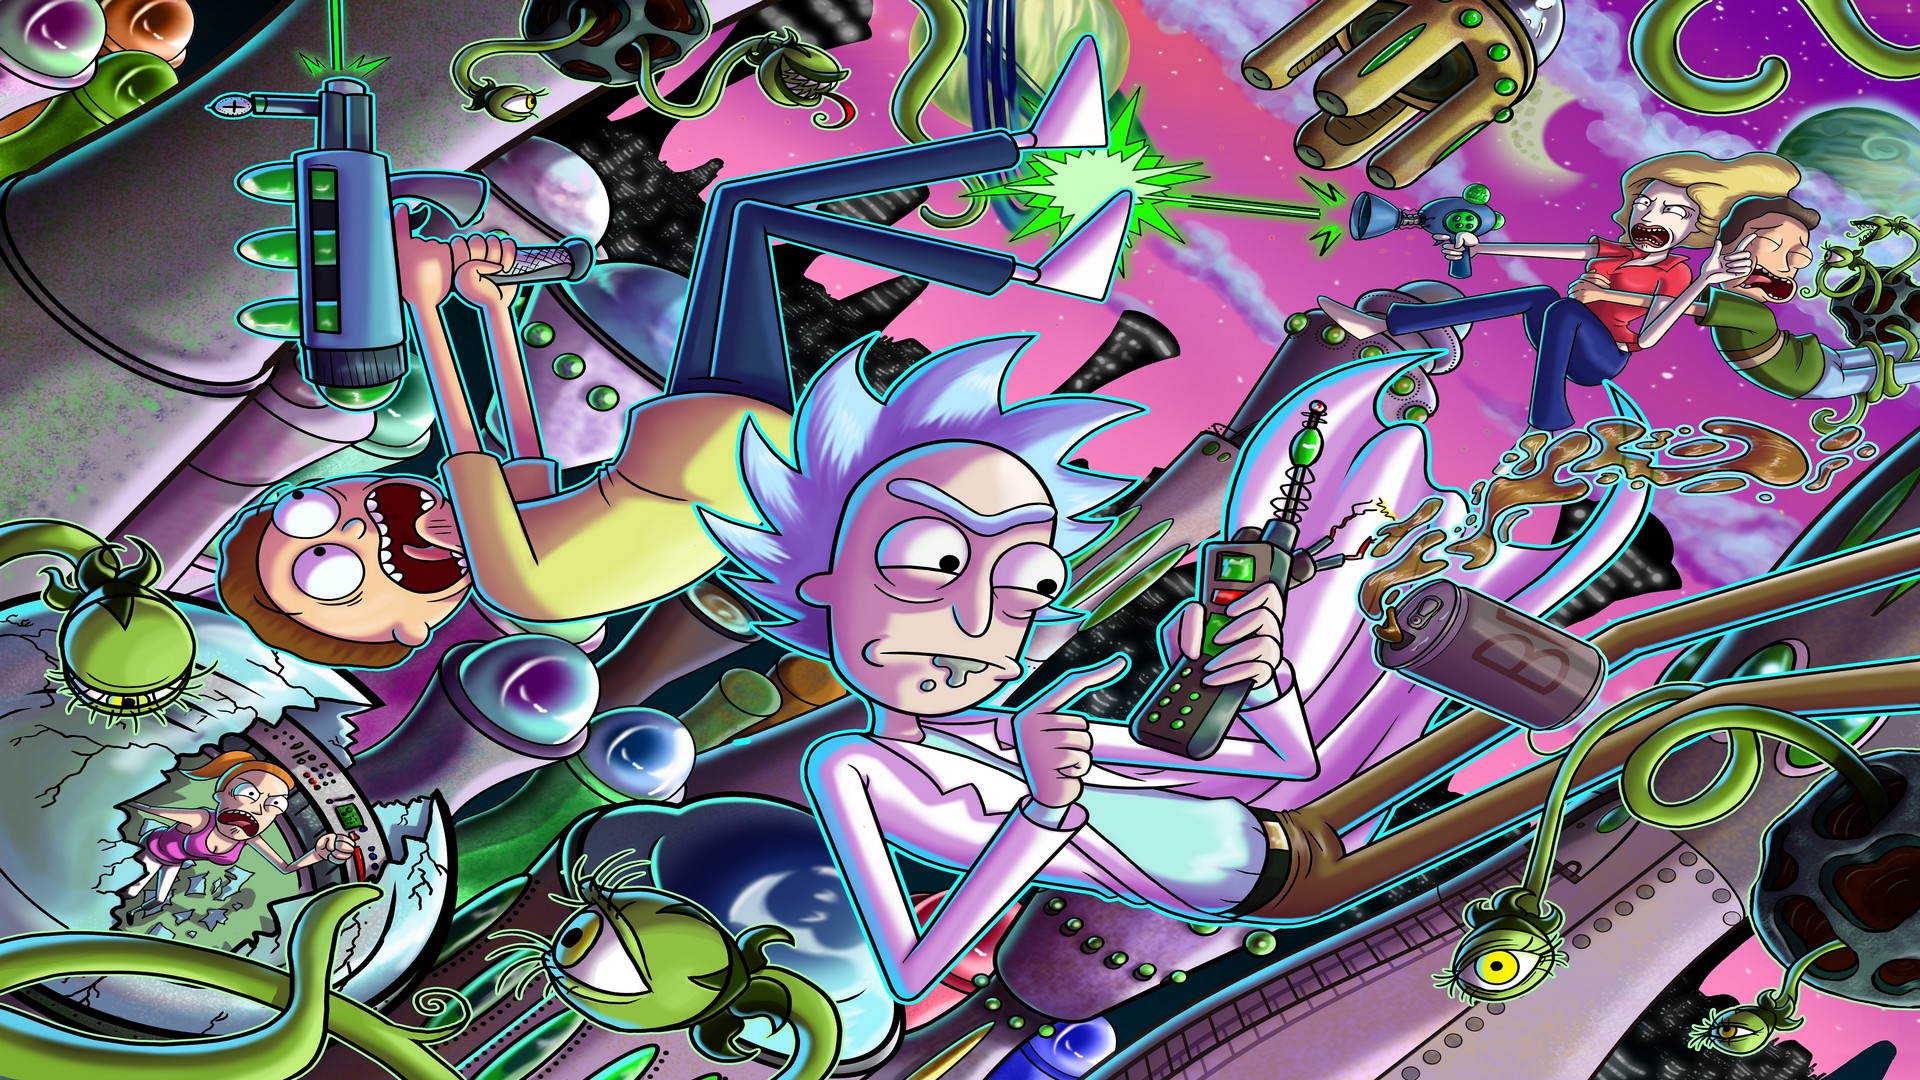 Desktop Wallpaper Cartoon Network Rick and Morty with image resolution 1920x1080 pixel. You can use this wallpaper as background for your desktop Computer Screensavers, Android or iPhone smartphones